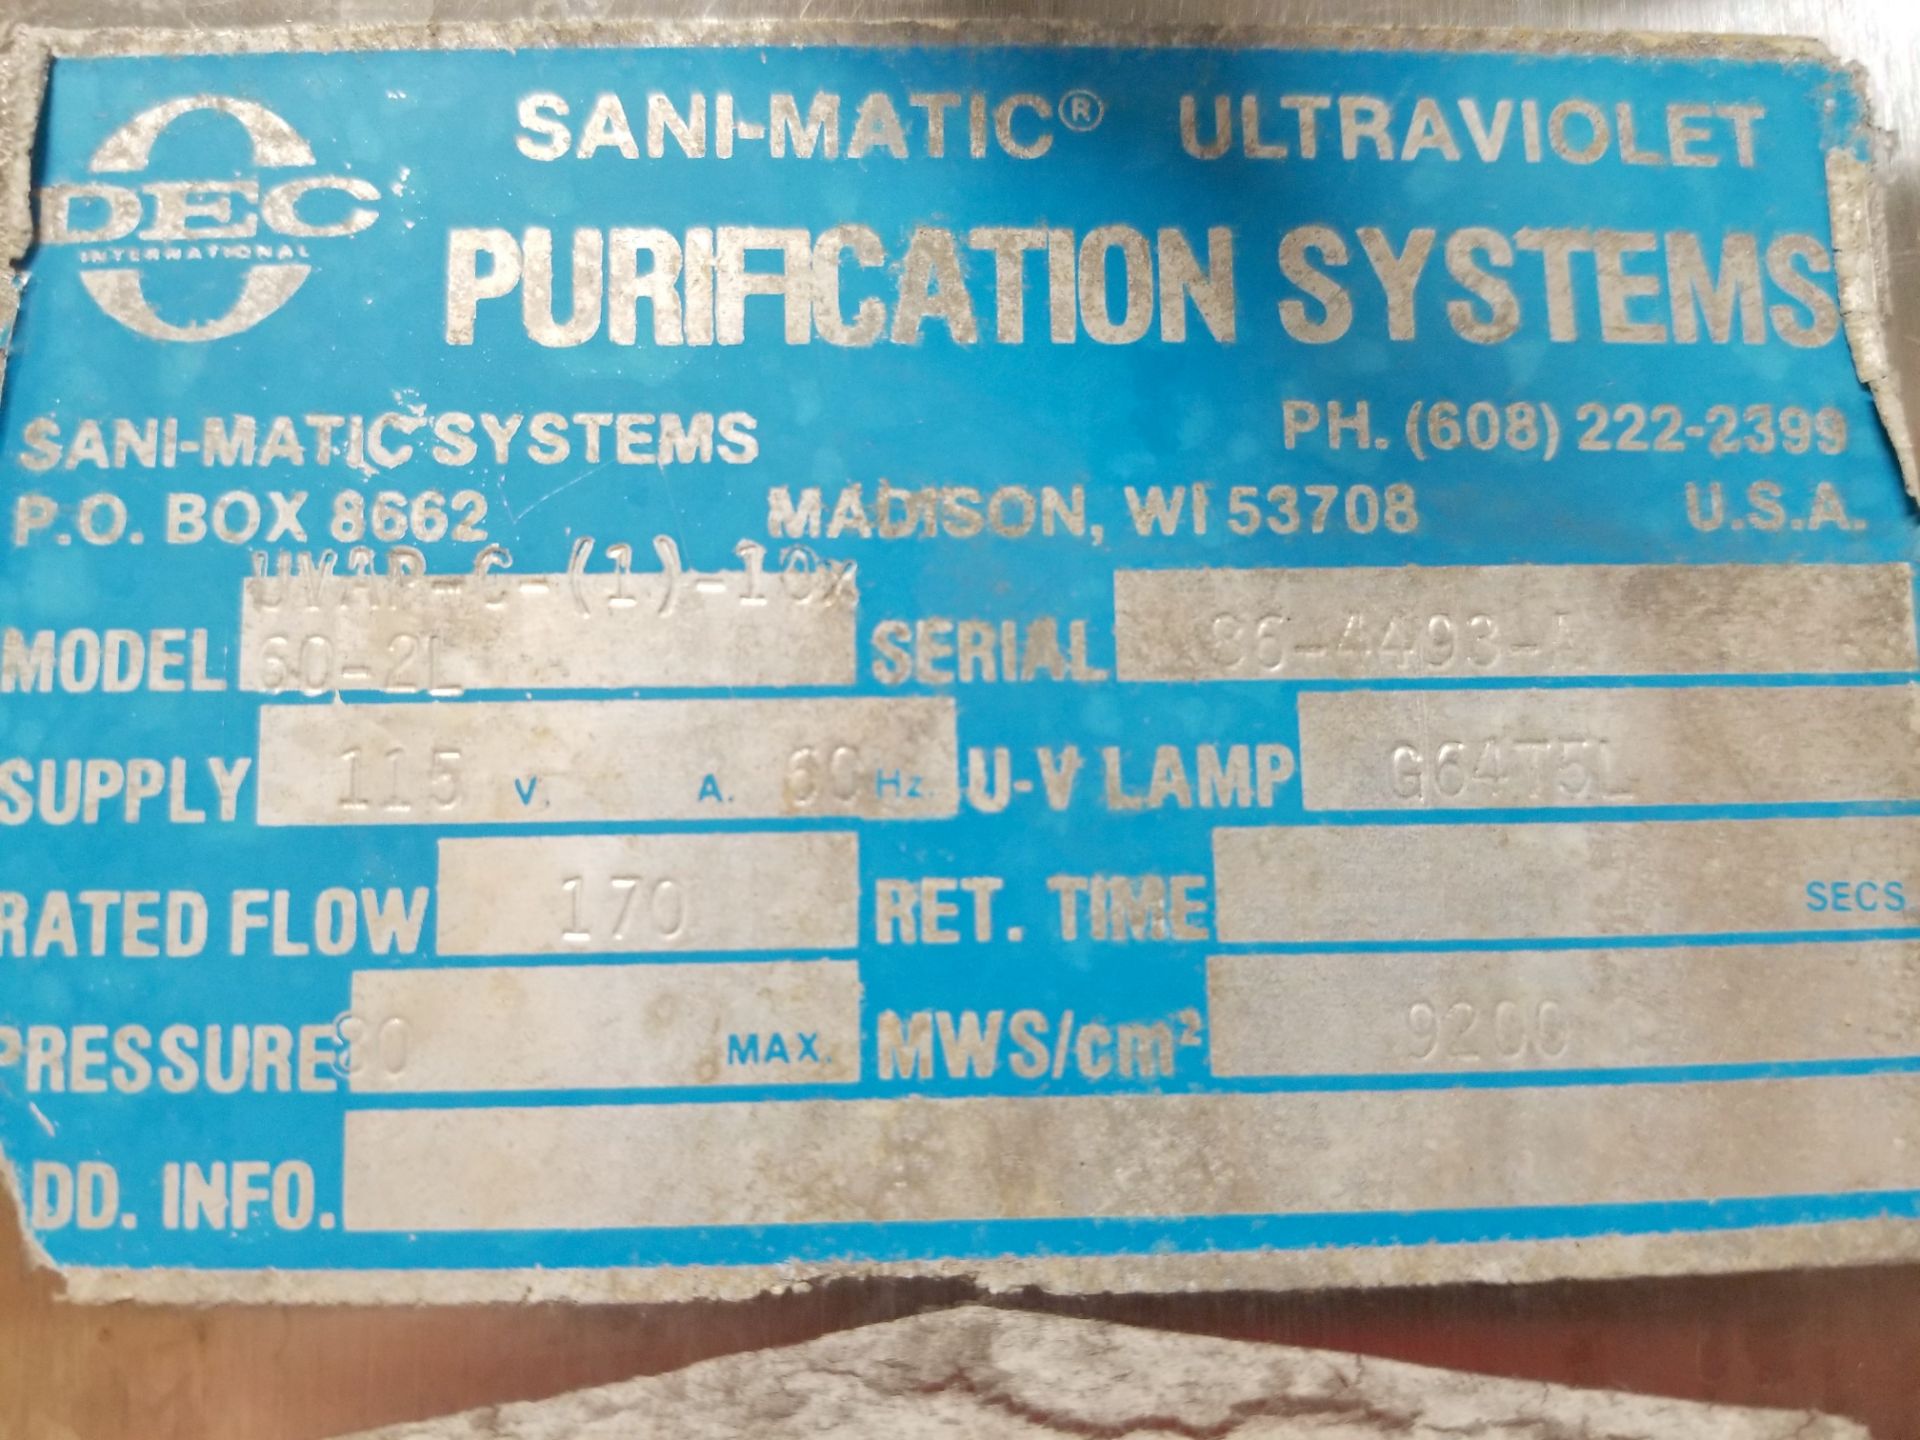 Sani-matic Ultraviolet Purification System - Image 2 of 4